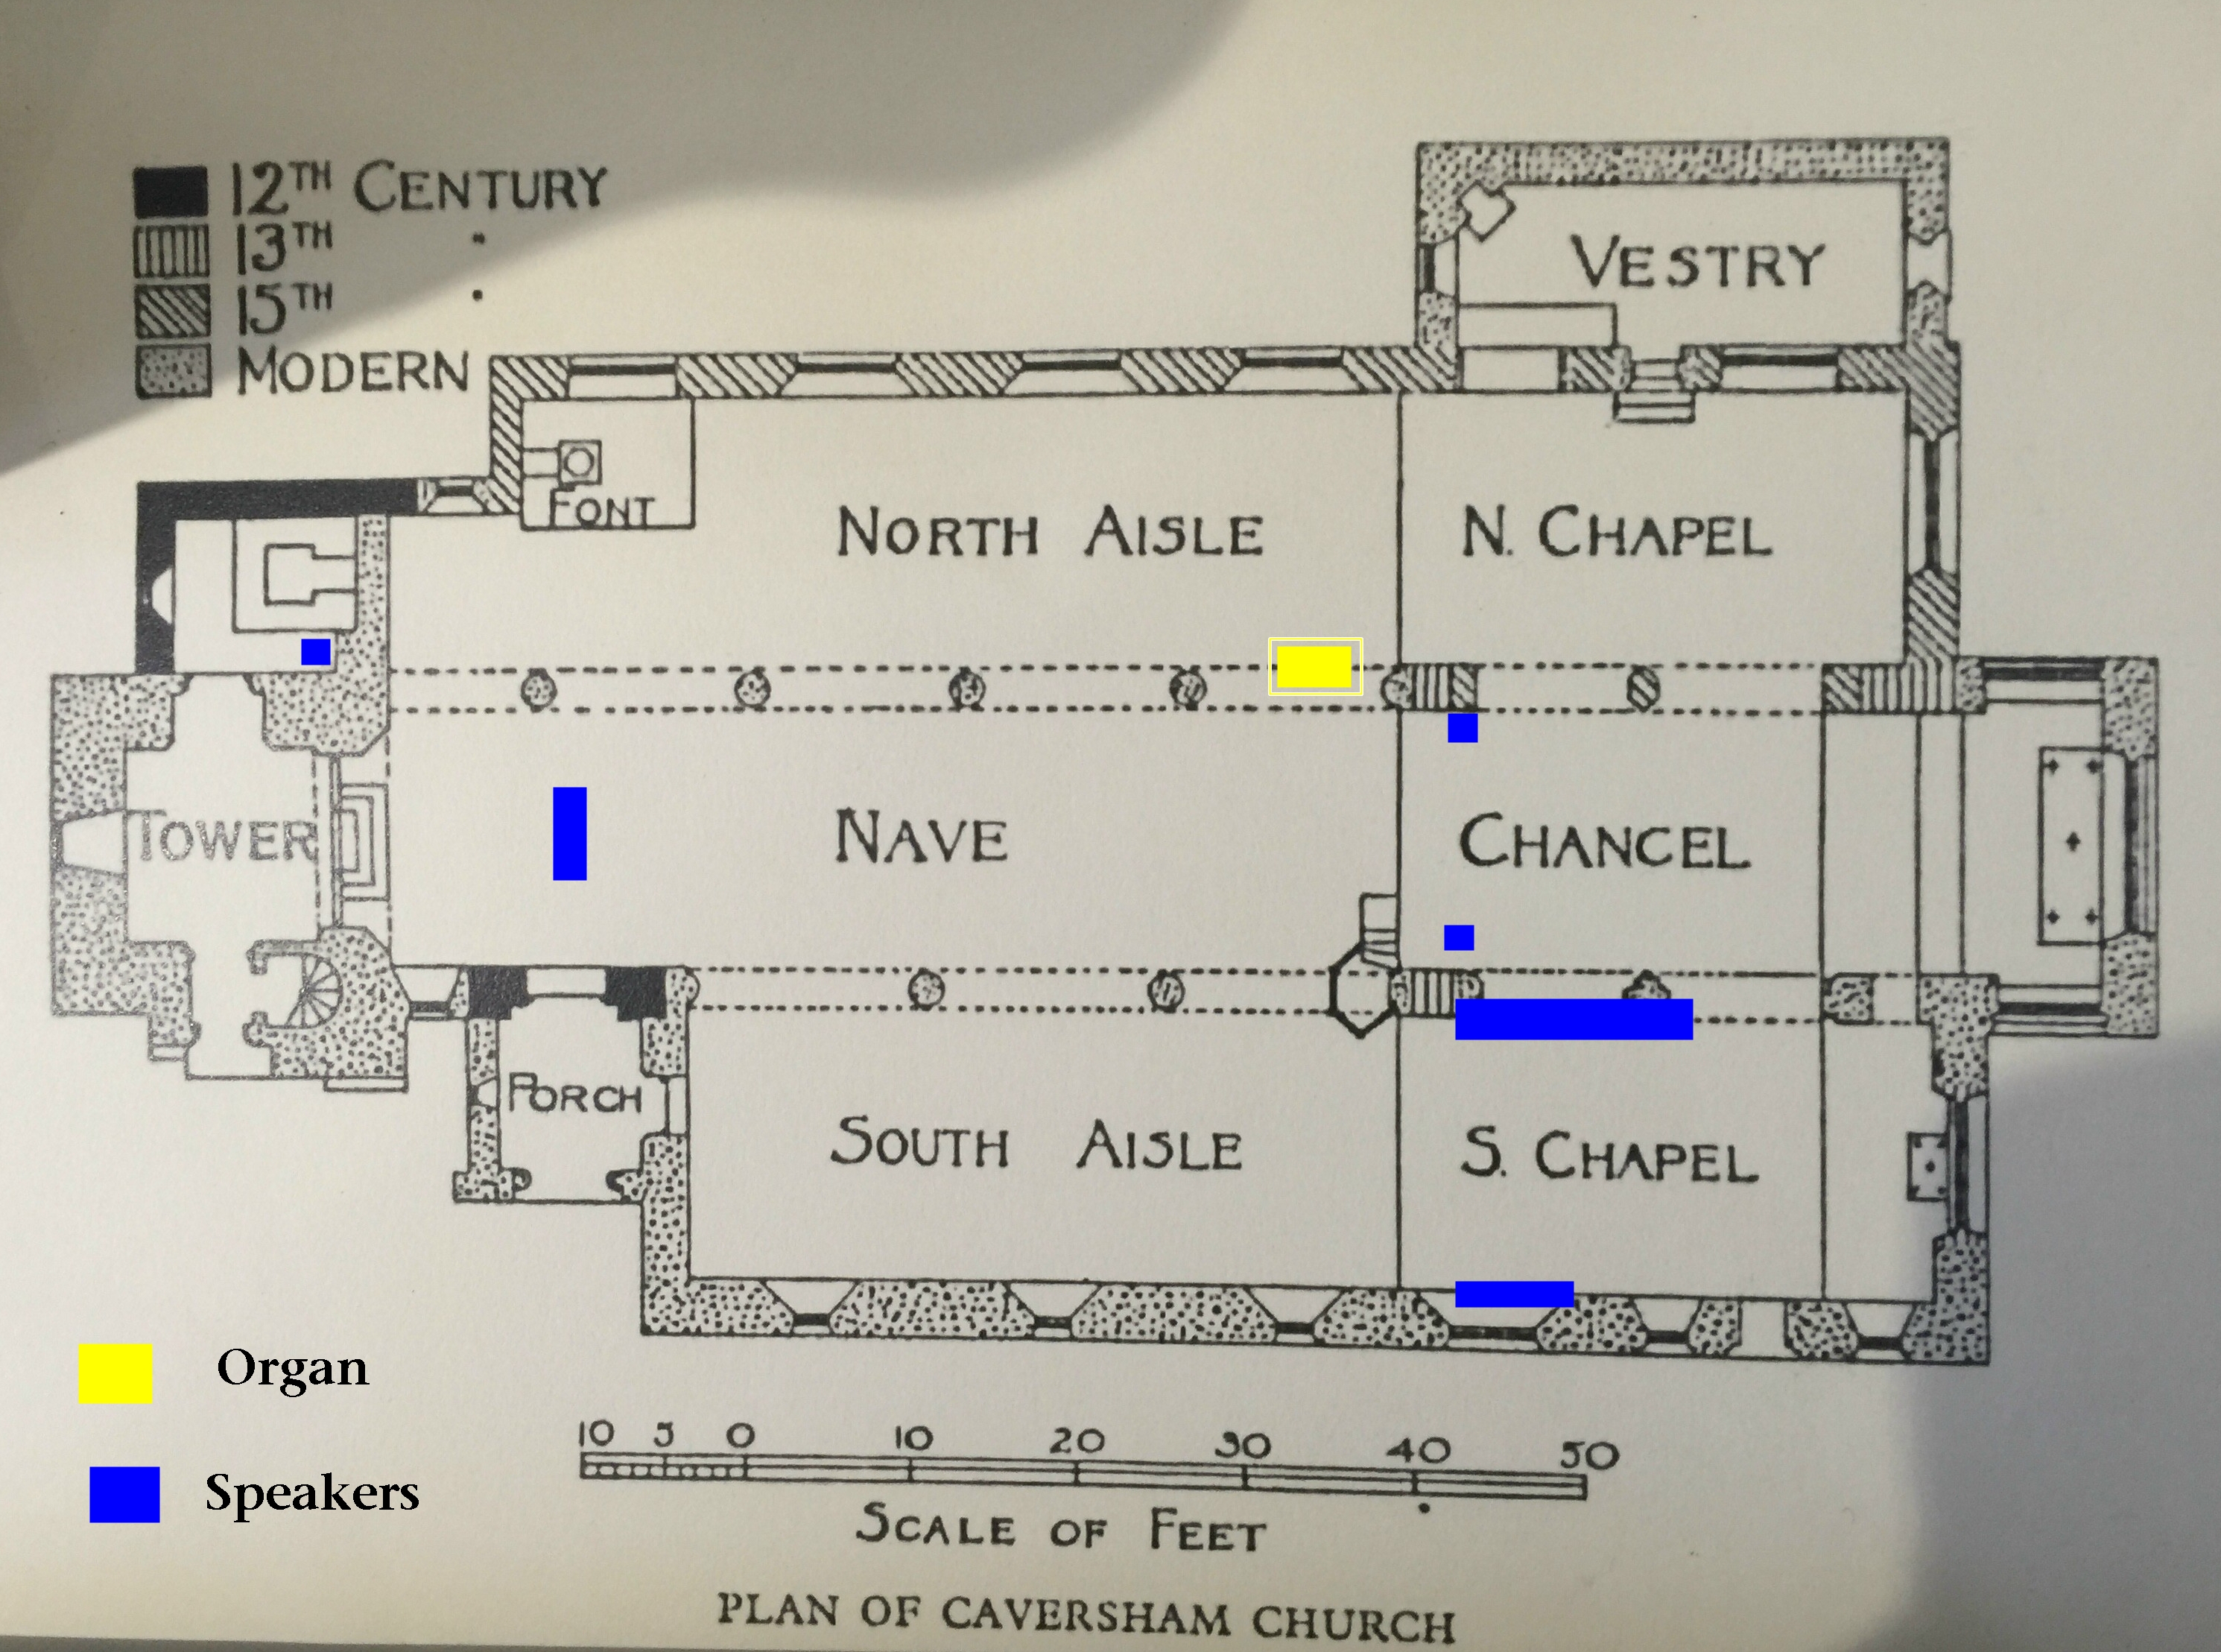 Church plan with speakers and organ